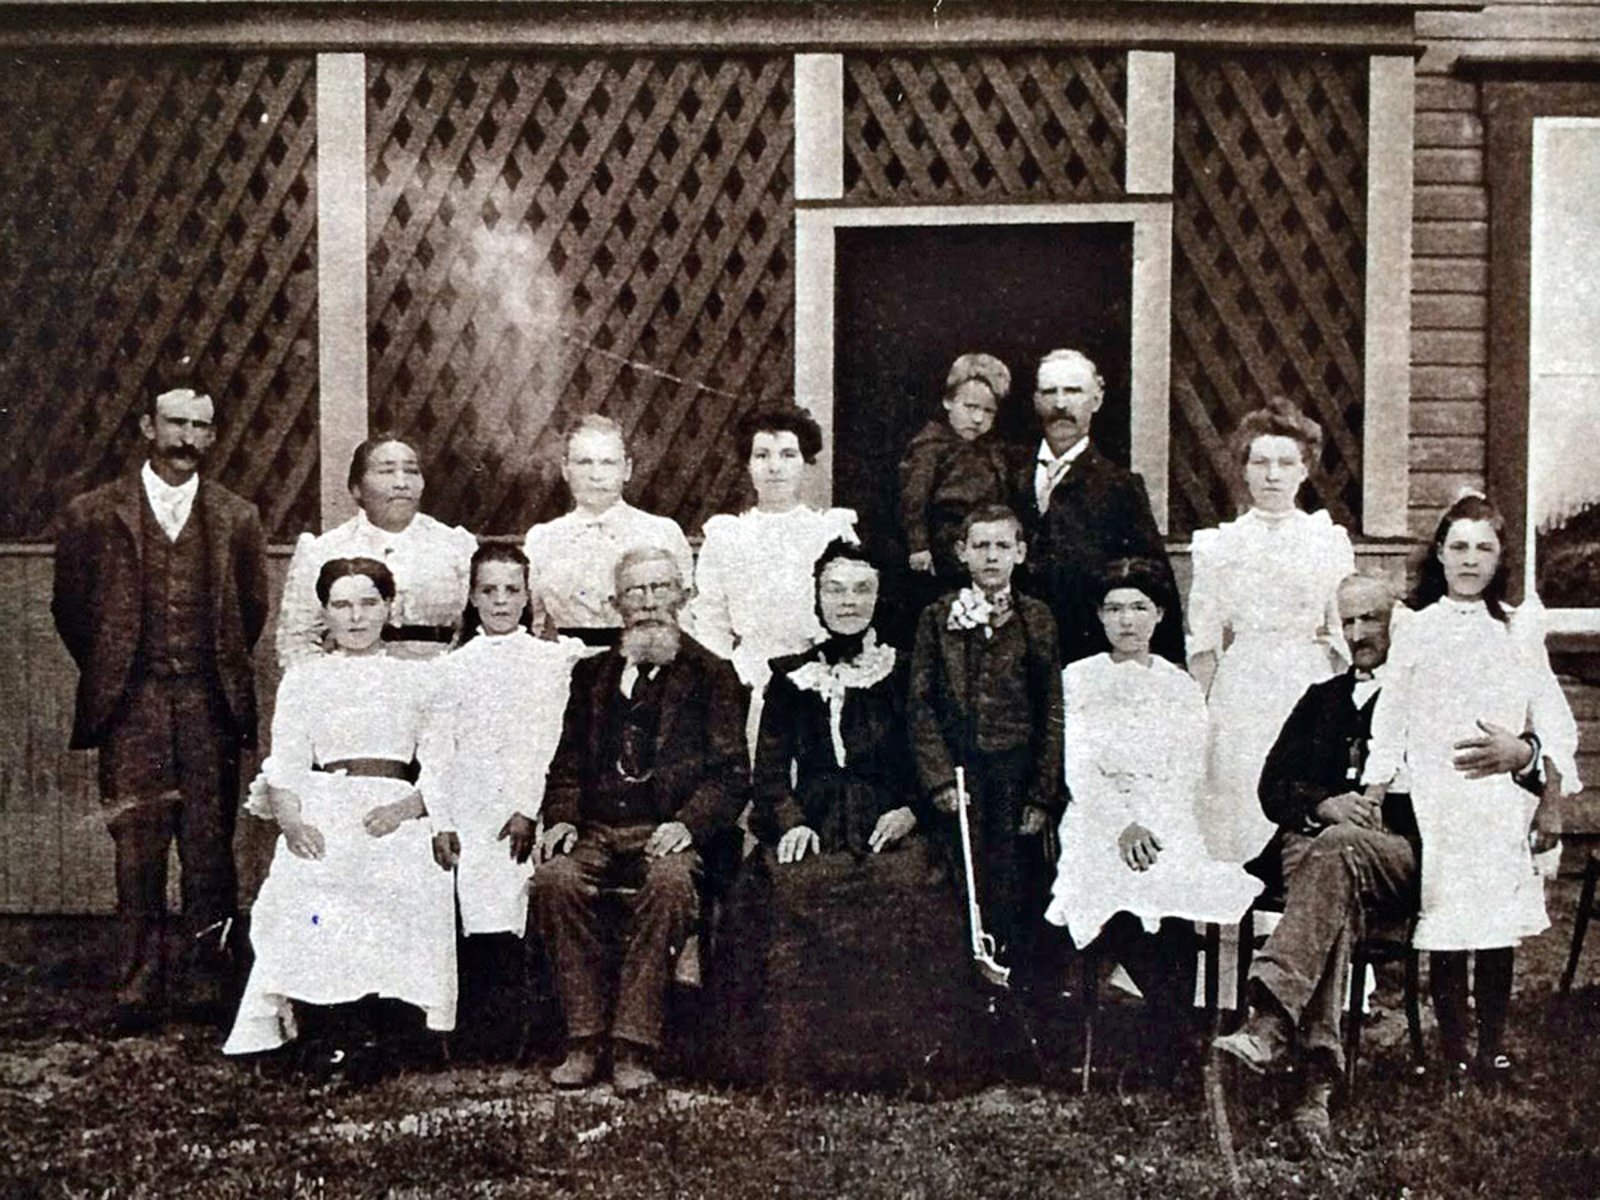 The O’Hare-Schubert family, c. 1901. Augustus and Catherine are seated in the centre.